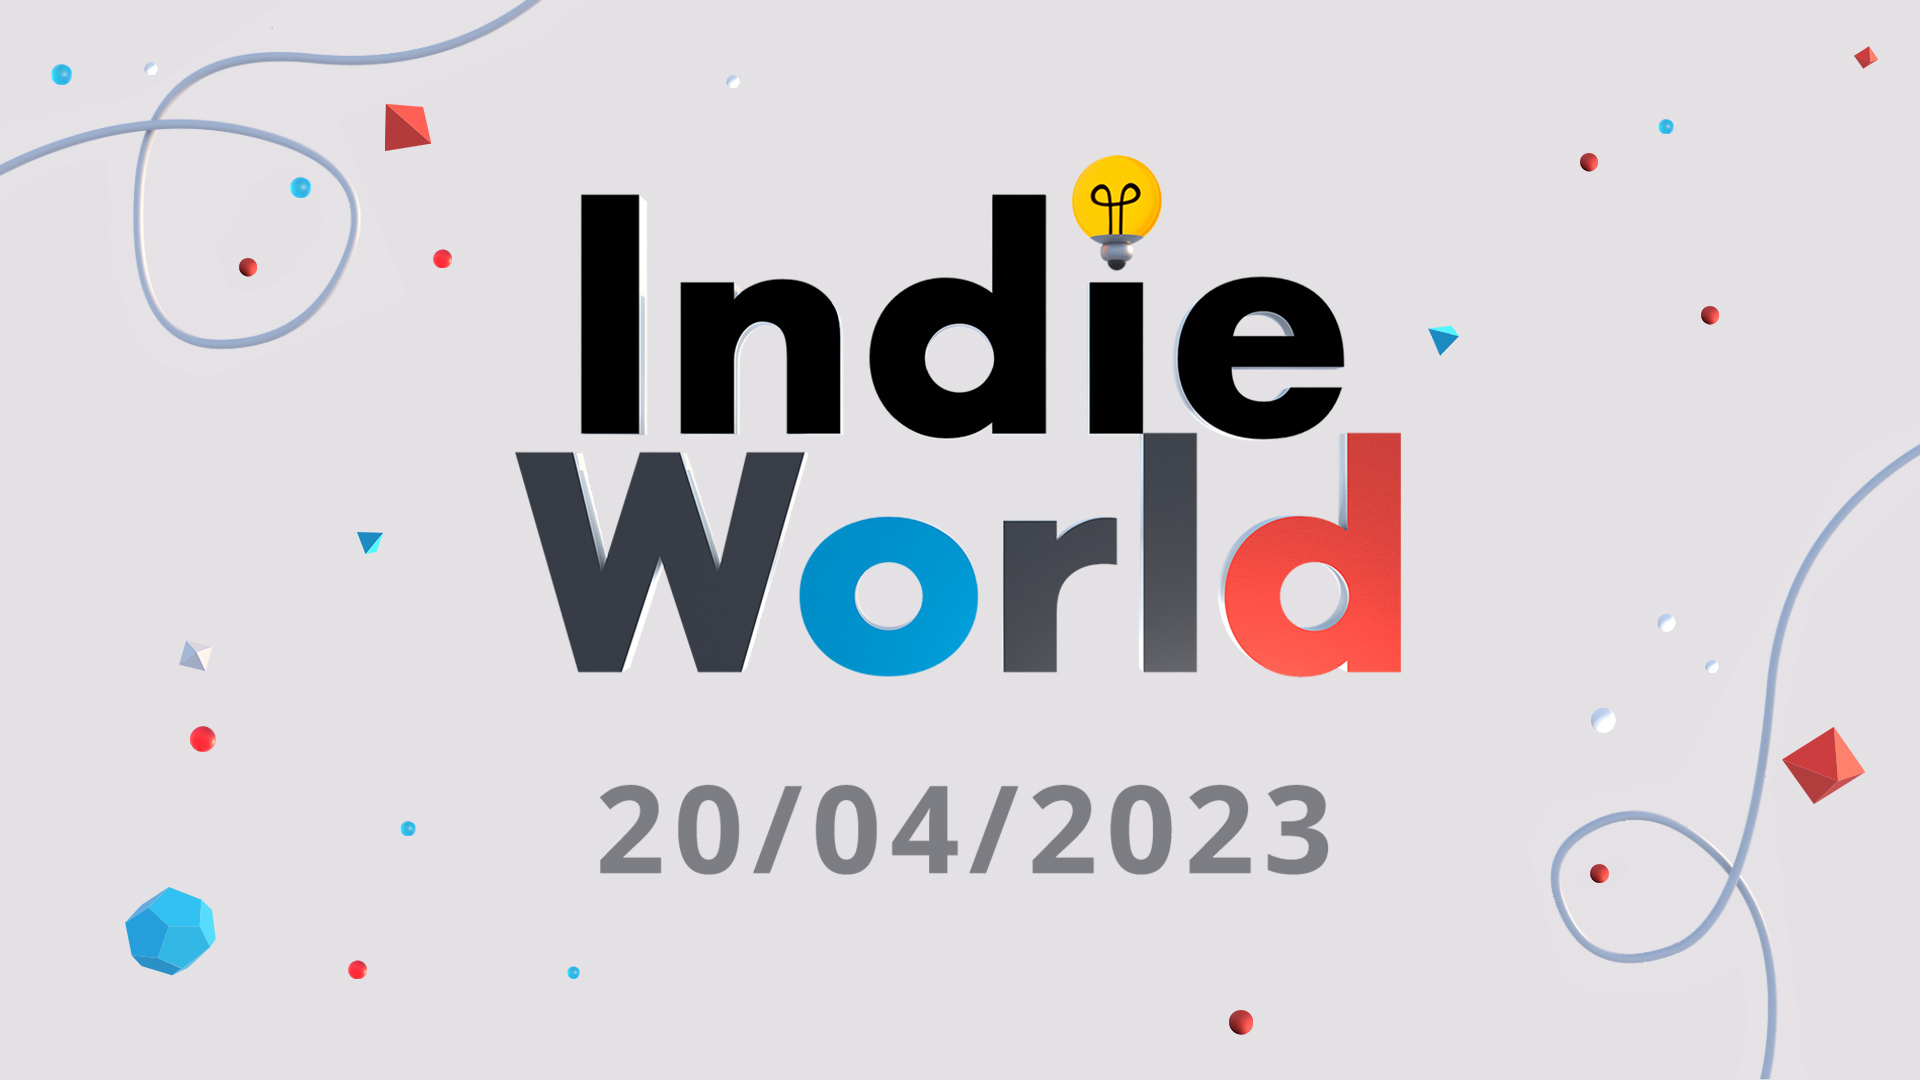 The artwork for Indie World, April 20, 2023.